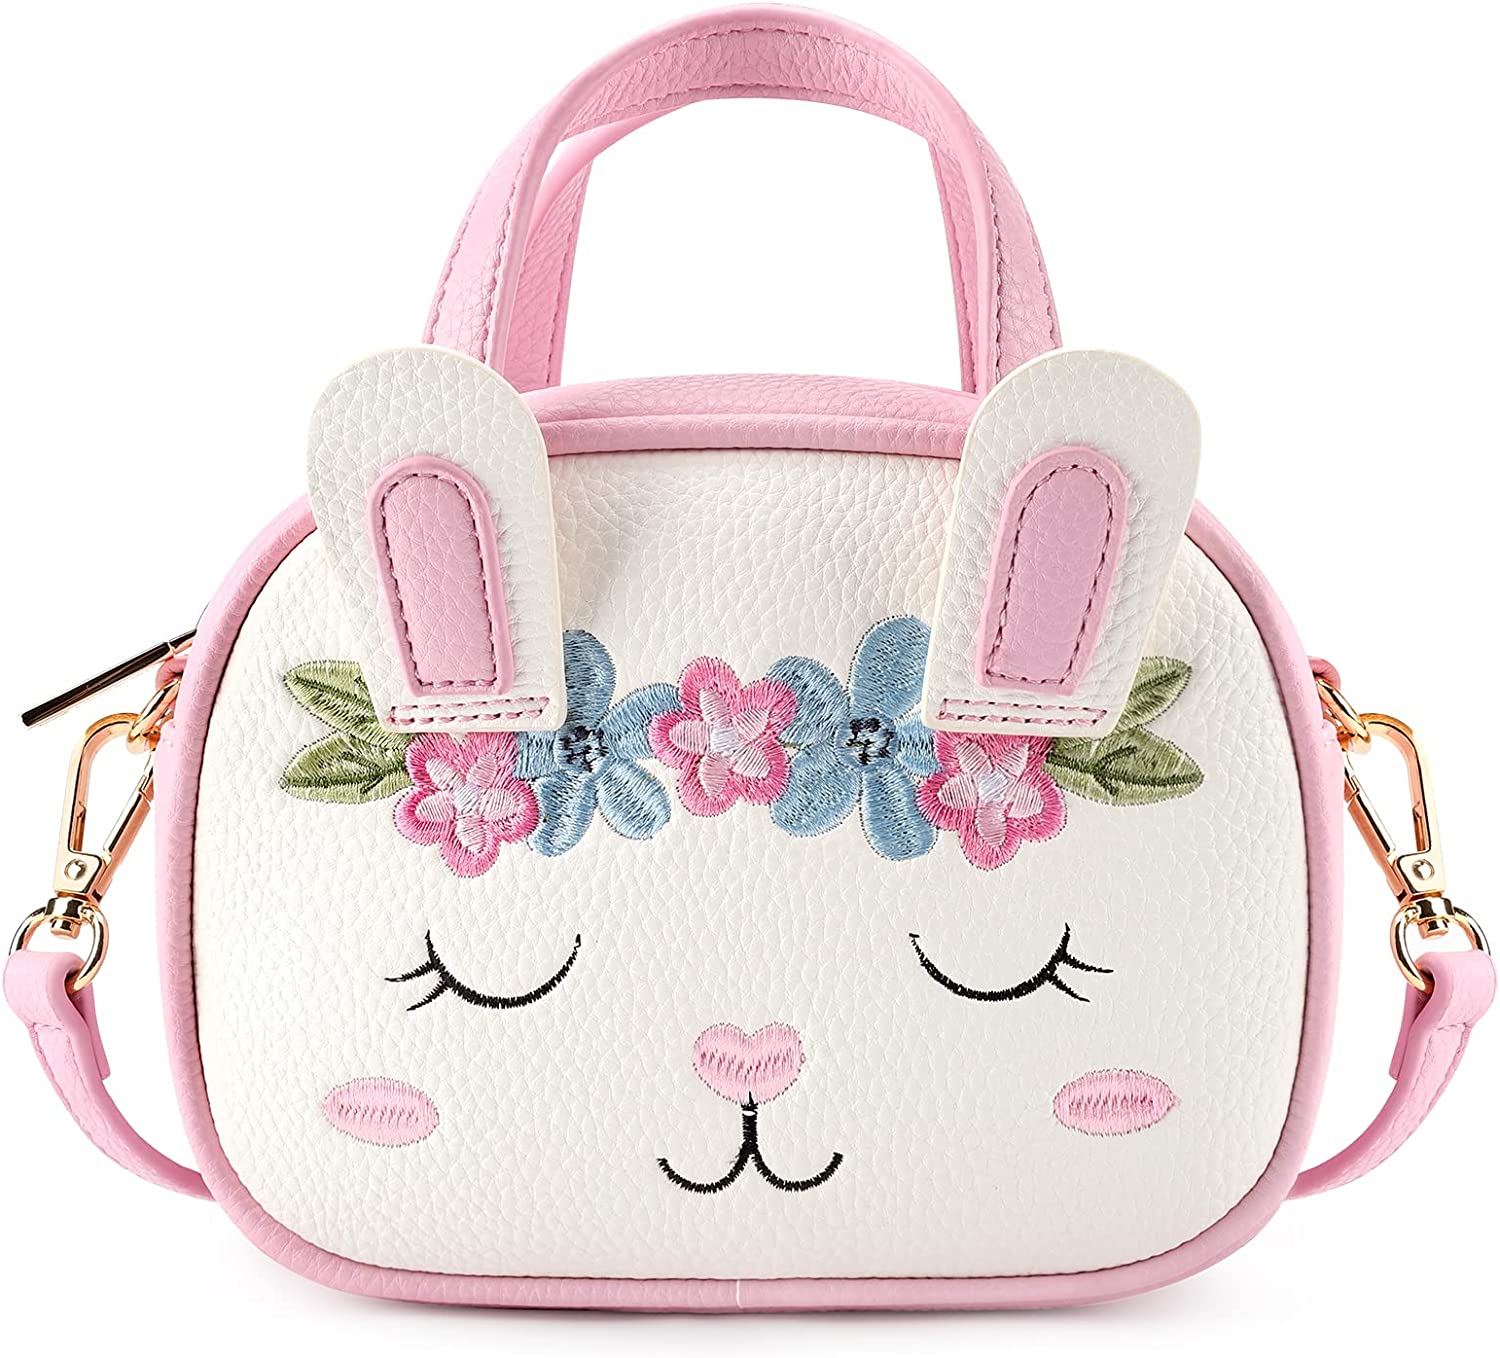  BUTKUS Retro Pattern Little Girls Purse Toddler Kids Crossbody  Bags for Girls Birthday Gift : Clothing, Shoes & Jewelry